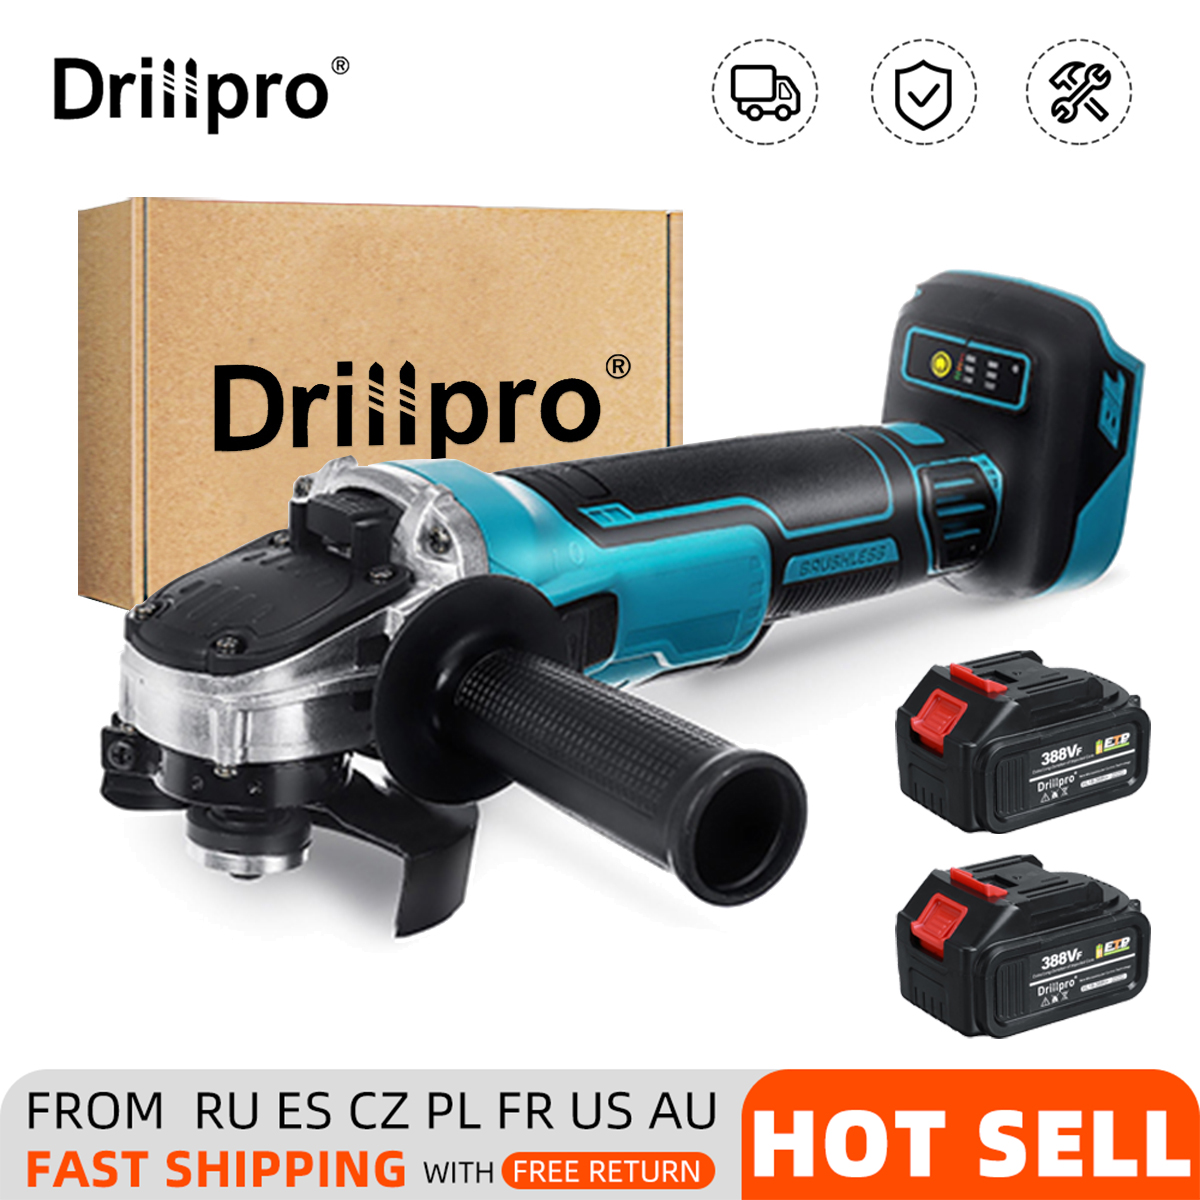 Drillpro 388VF 100mm/125mm Brushless Angle Grinder Rechargeable Electric Cutting Grinding Tool W/ 1/2 Battery